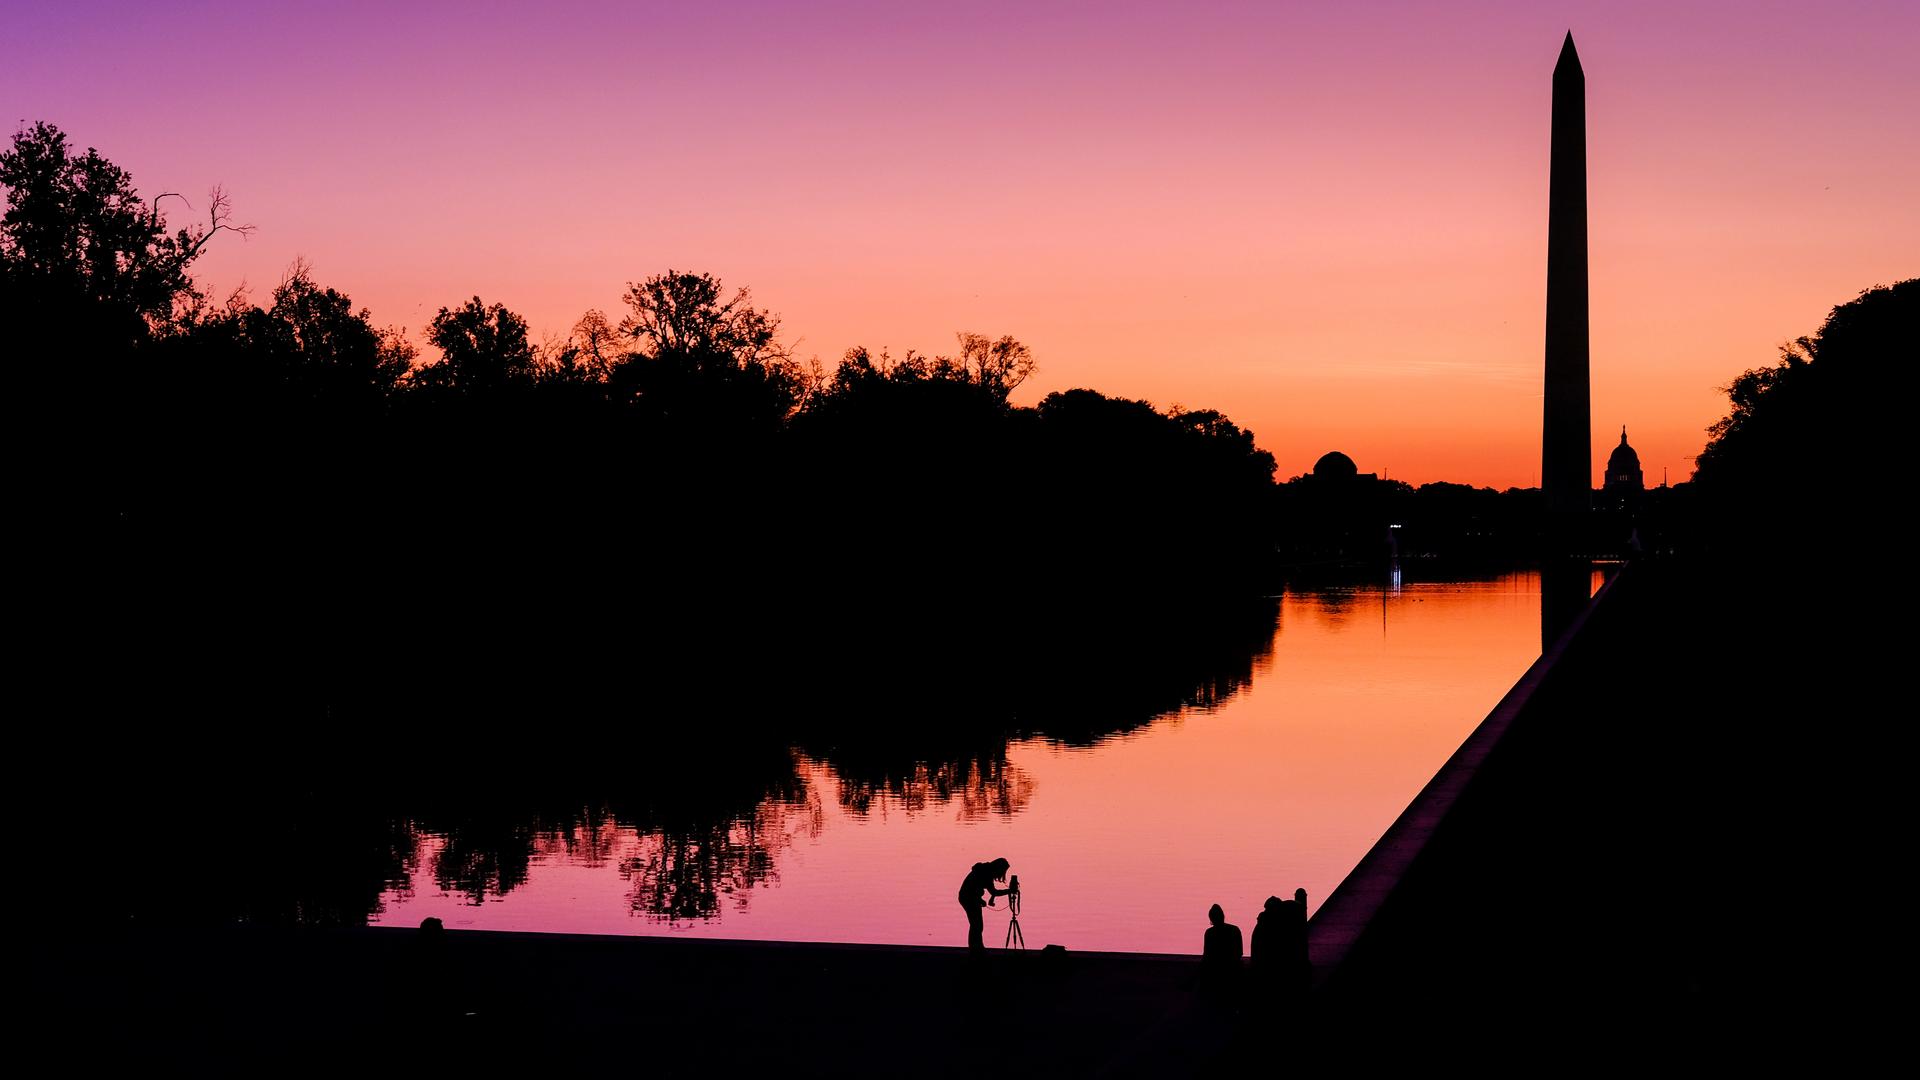 A pink and orange sunset along the National Mall in Washington DC with silhouetted trees